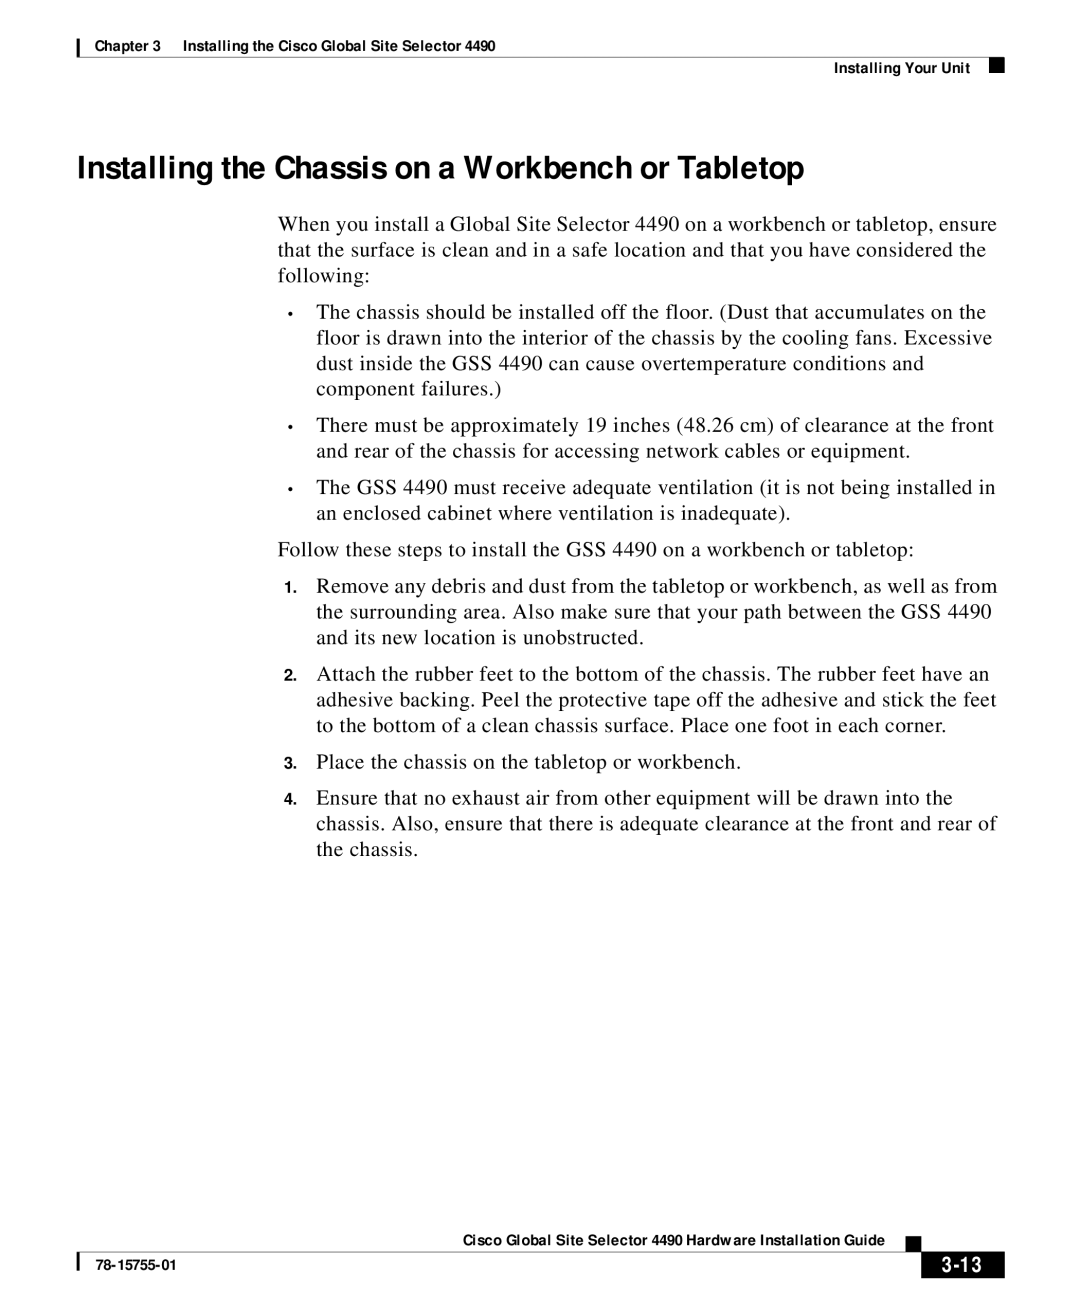 Cisco Systems 4490 appendix Installing the Chassis on a Workbench or Tabletop, 3-13 